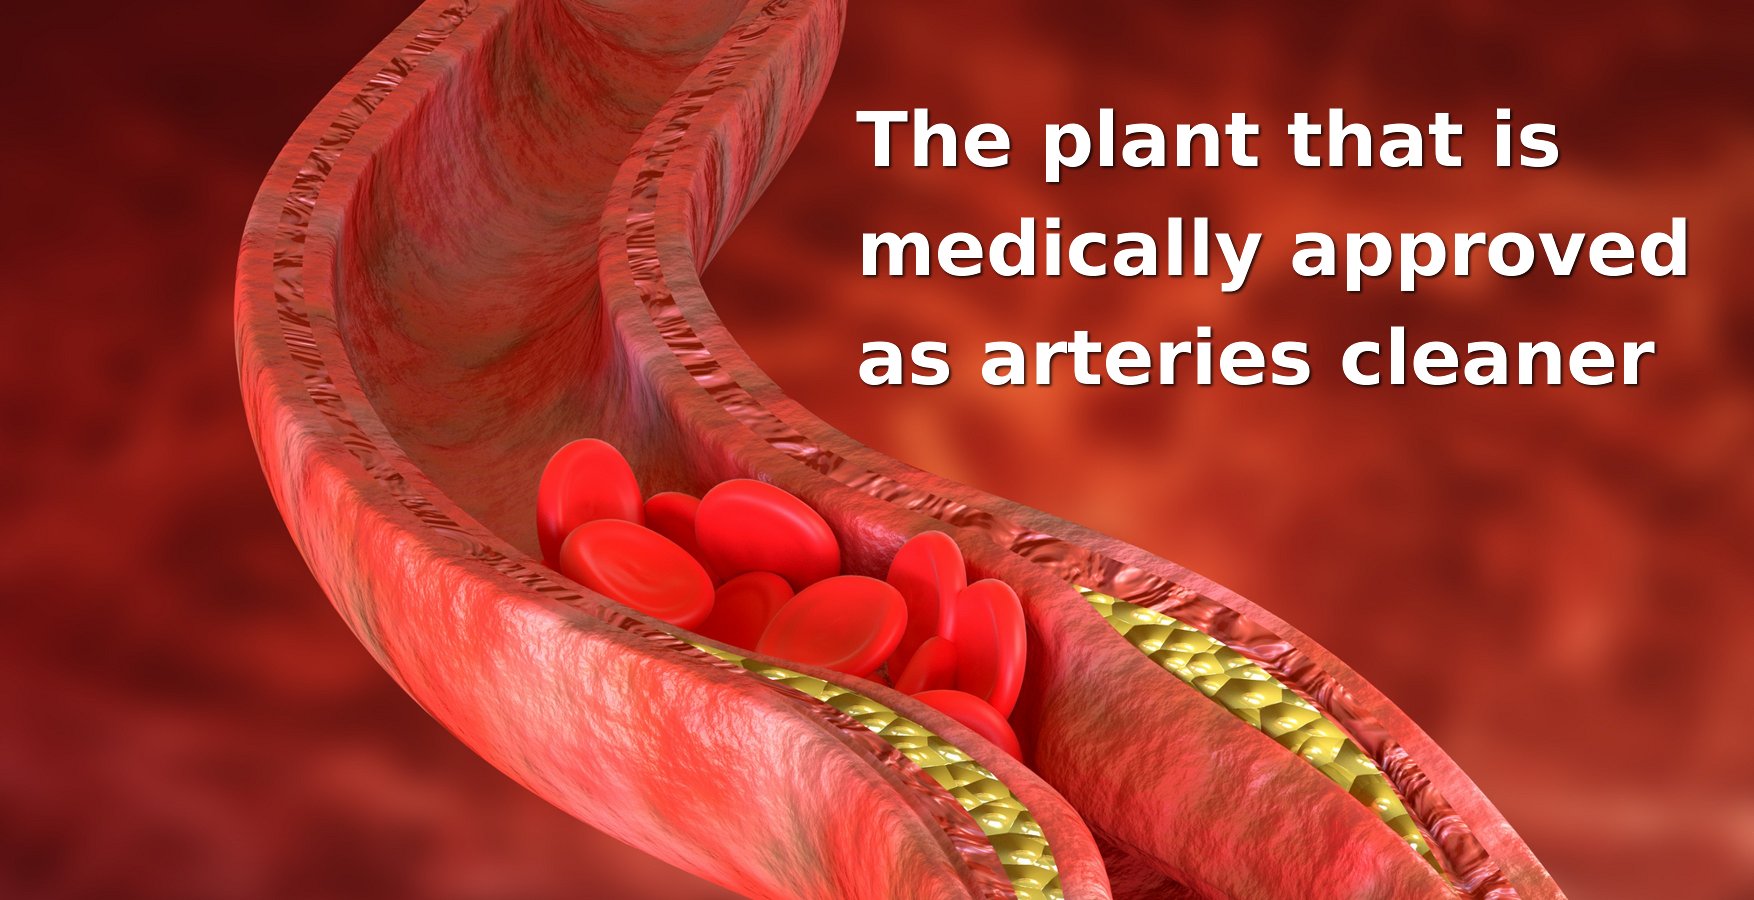 The plant that has been clinically proven to cleanse the arteries in the body